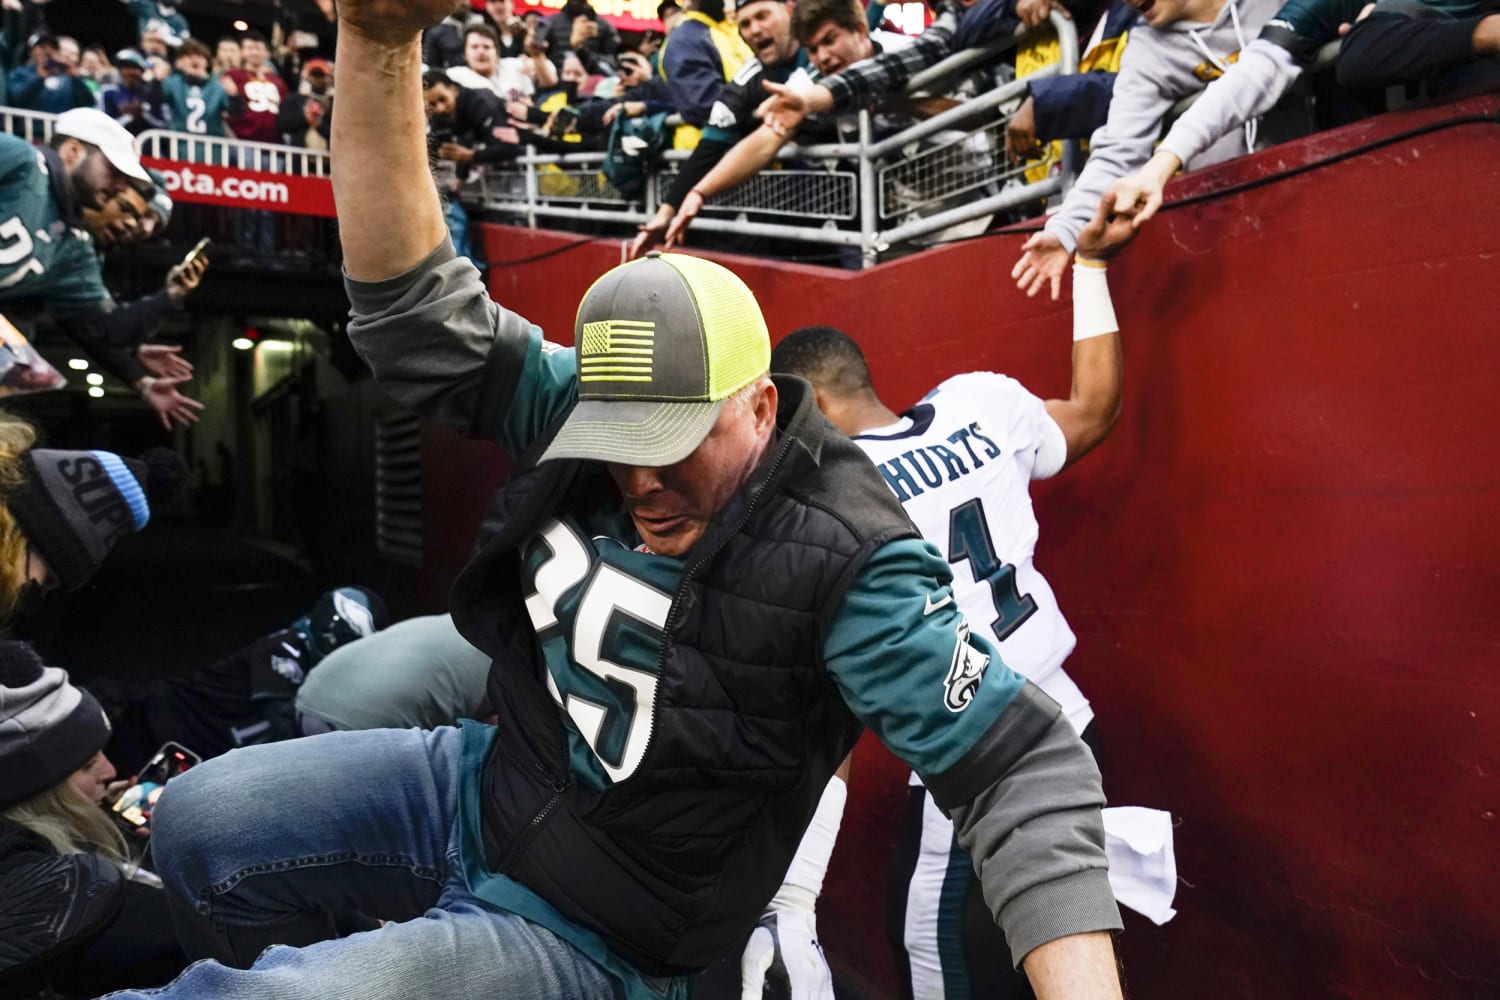 Eagles fans fall after railing collapses at FedEx Field